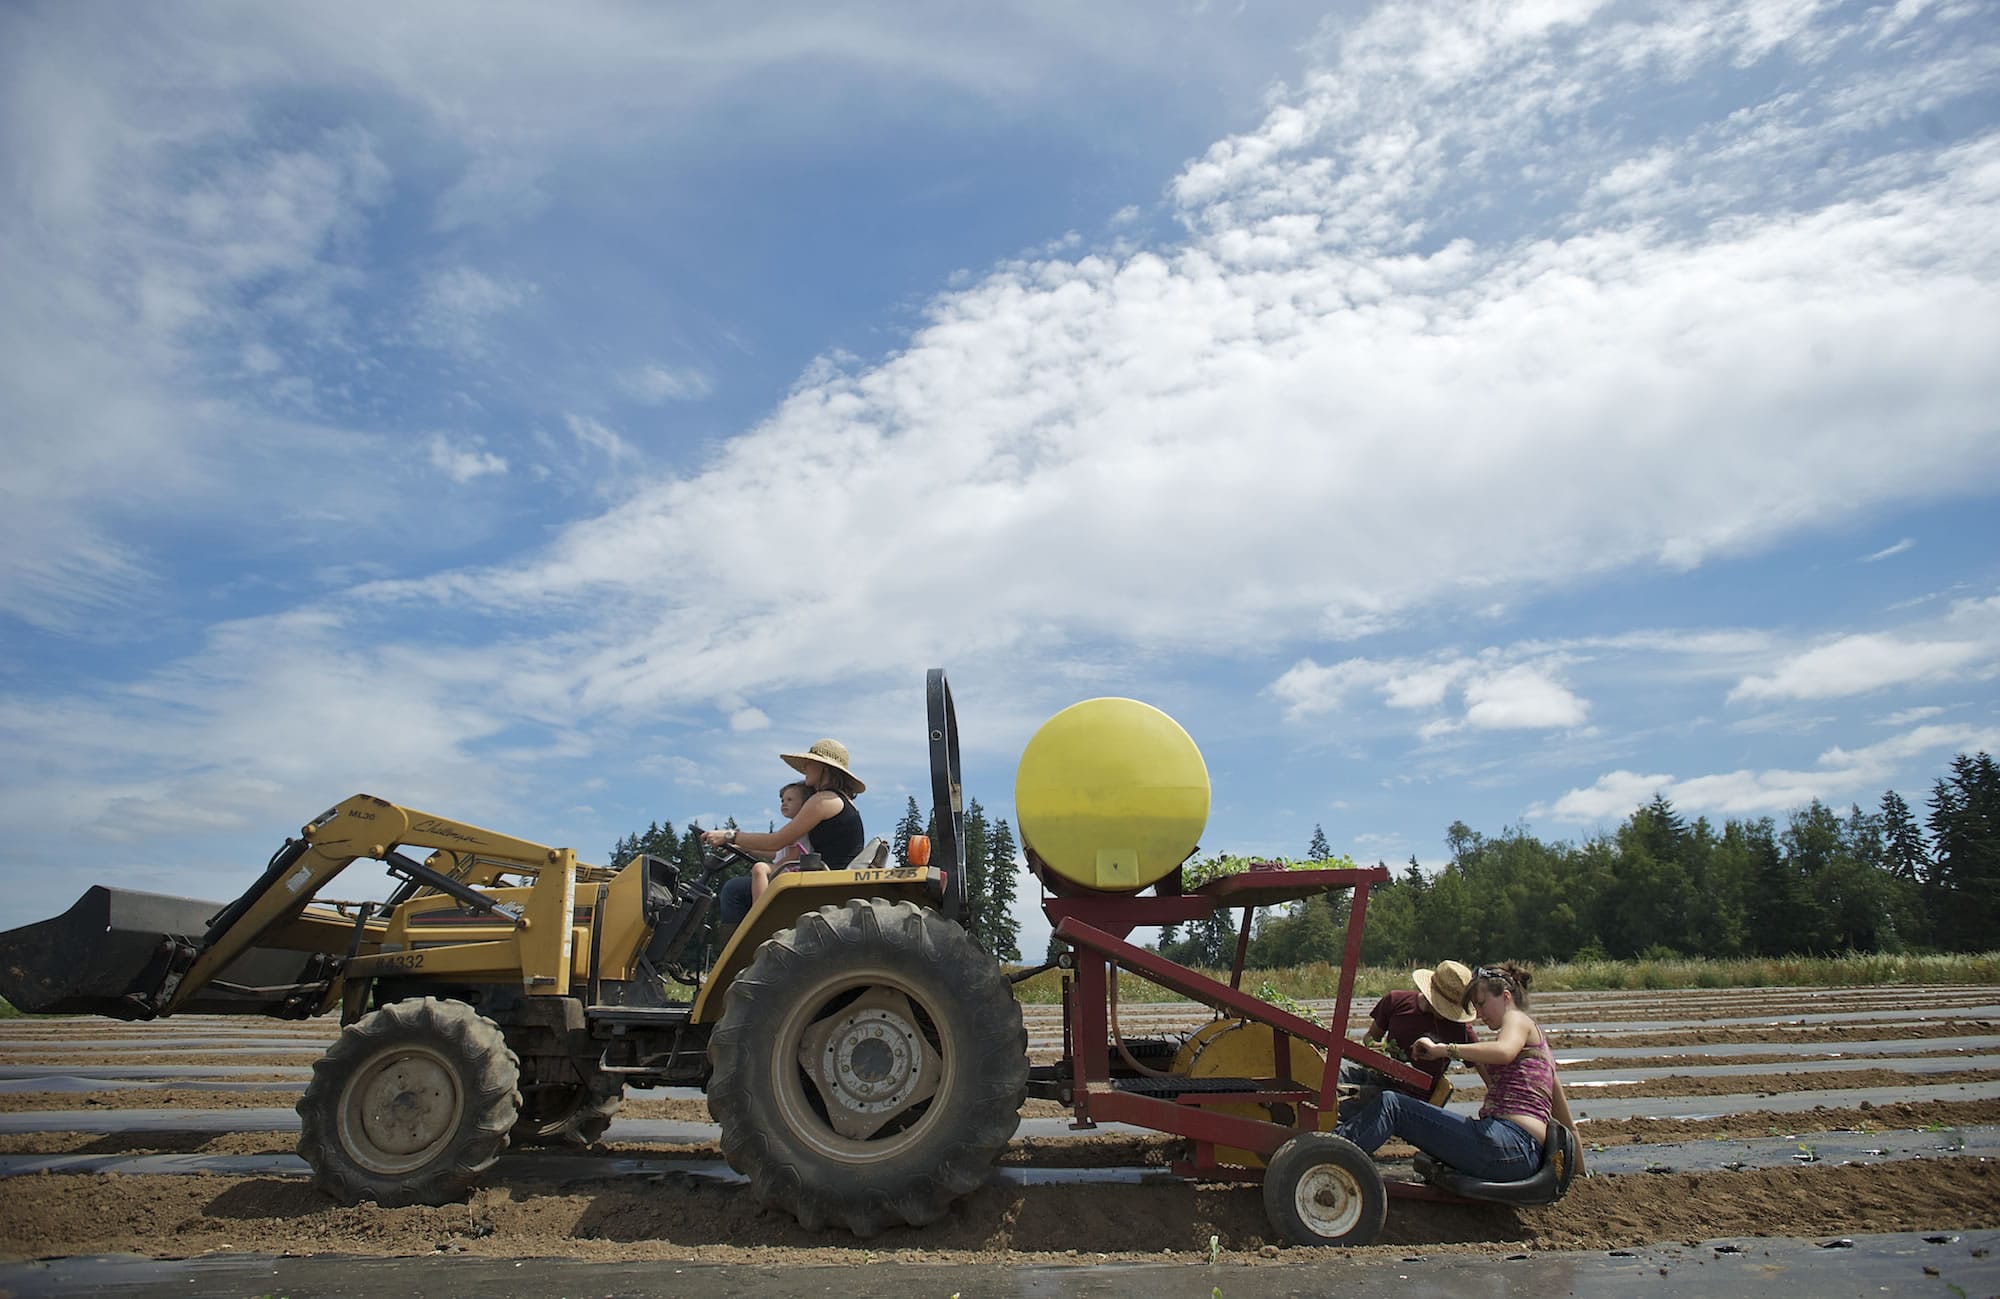 Aireanna Vanasse, 3, and Katrina Stanley, 24, drive the tractor as Brandon Jacobi, 25, and Nellie Vanasse, 21, plant a row of red cabbage at Gee Creek Farm outside Ridgefield last week.